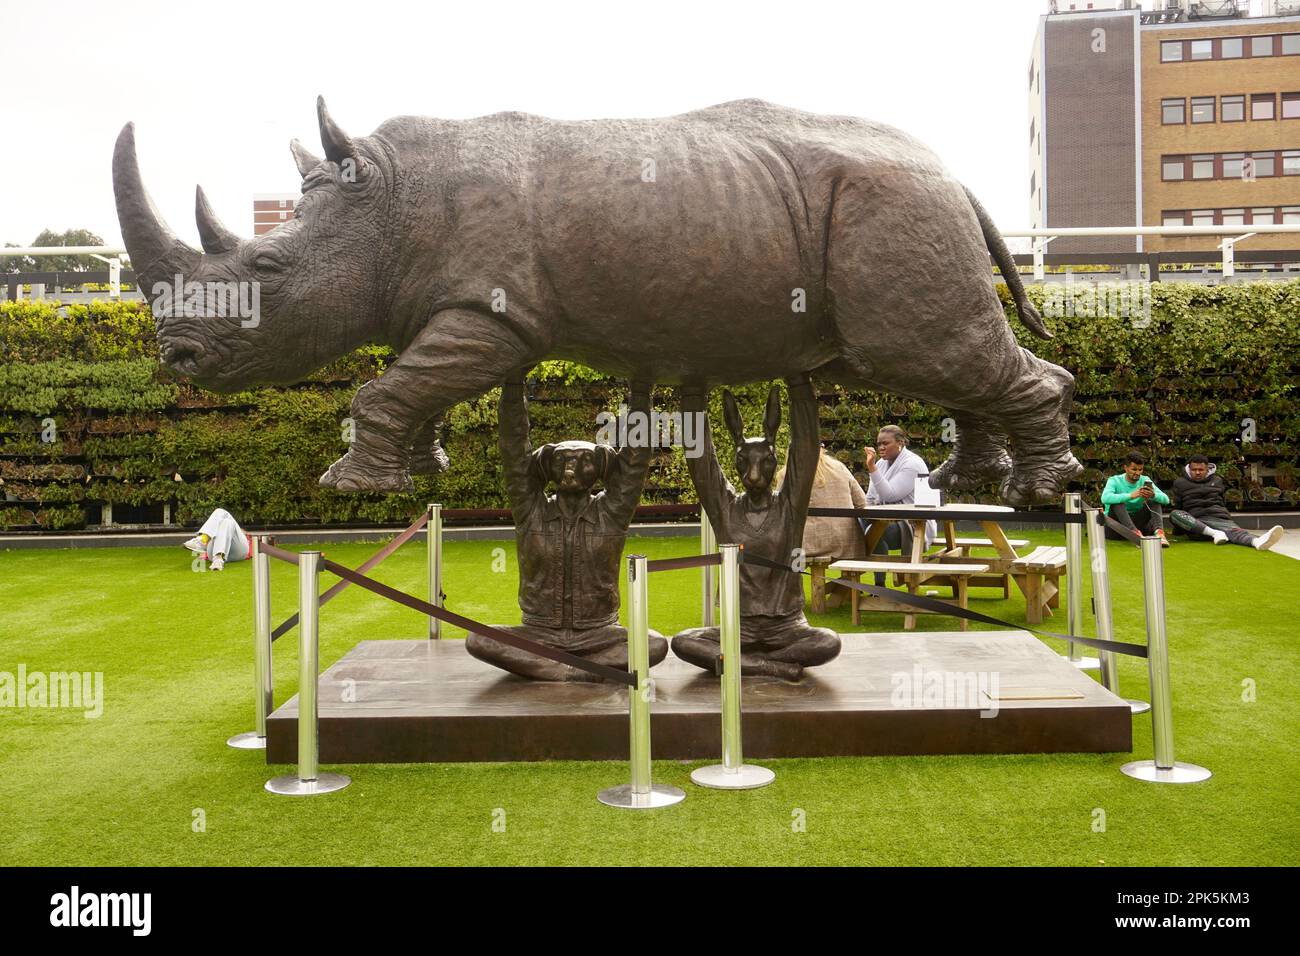 Rise Up Rhino statue in Westfield Shopping Centre, White City, lLondon, United Kingdom Stock Photo